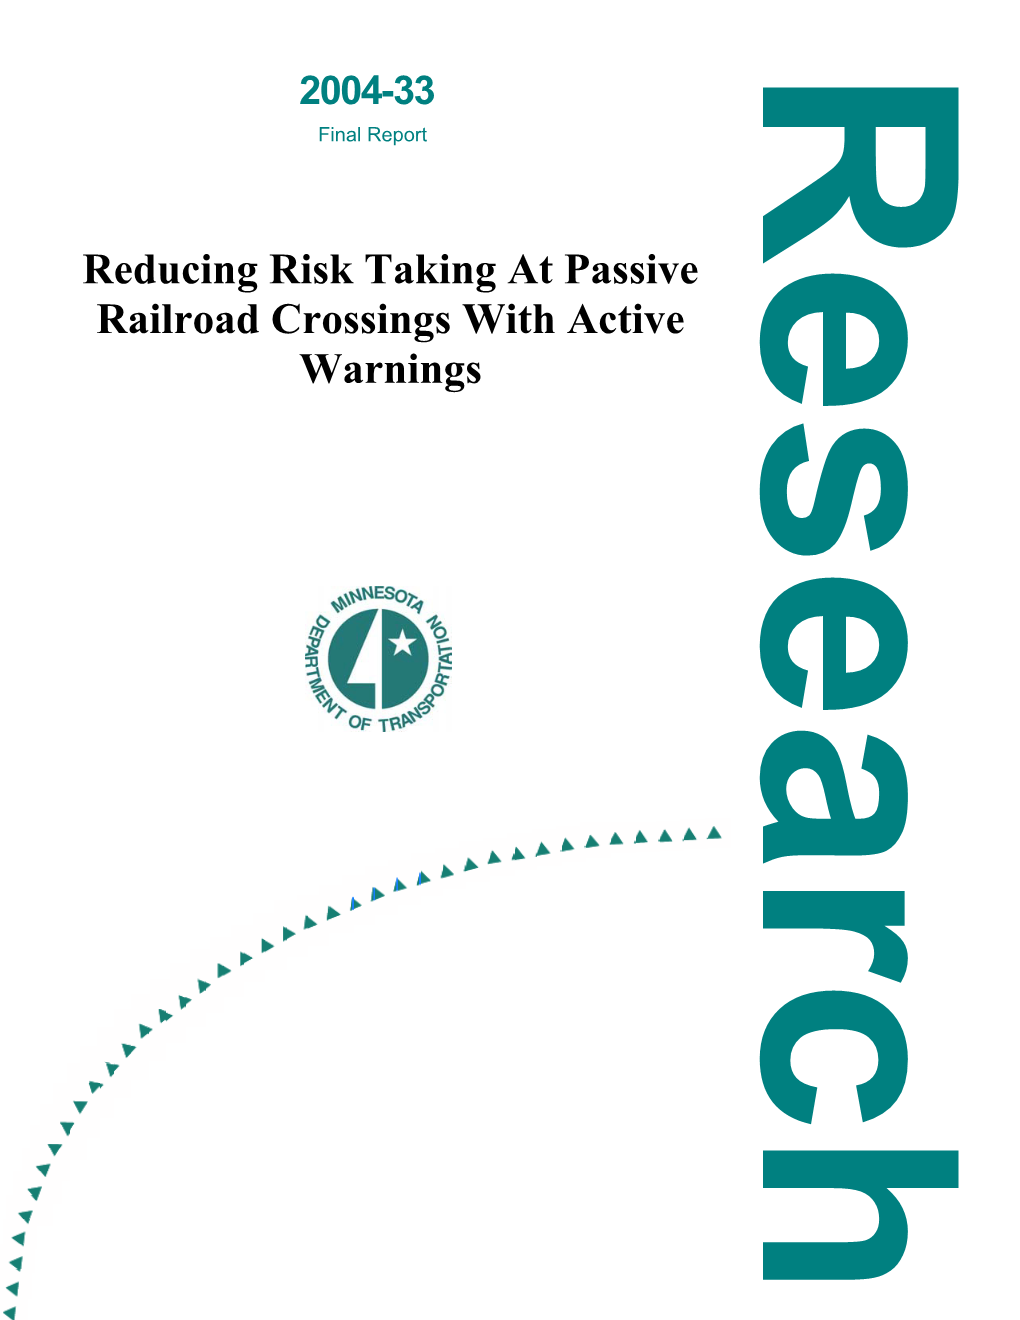 Reducing Risk Taking at Passive Railroad Crossings with Active Warnings